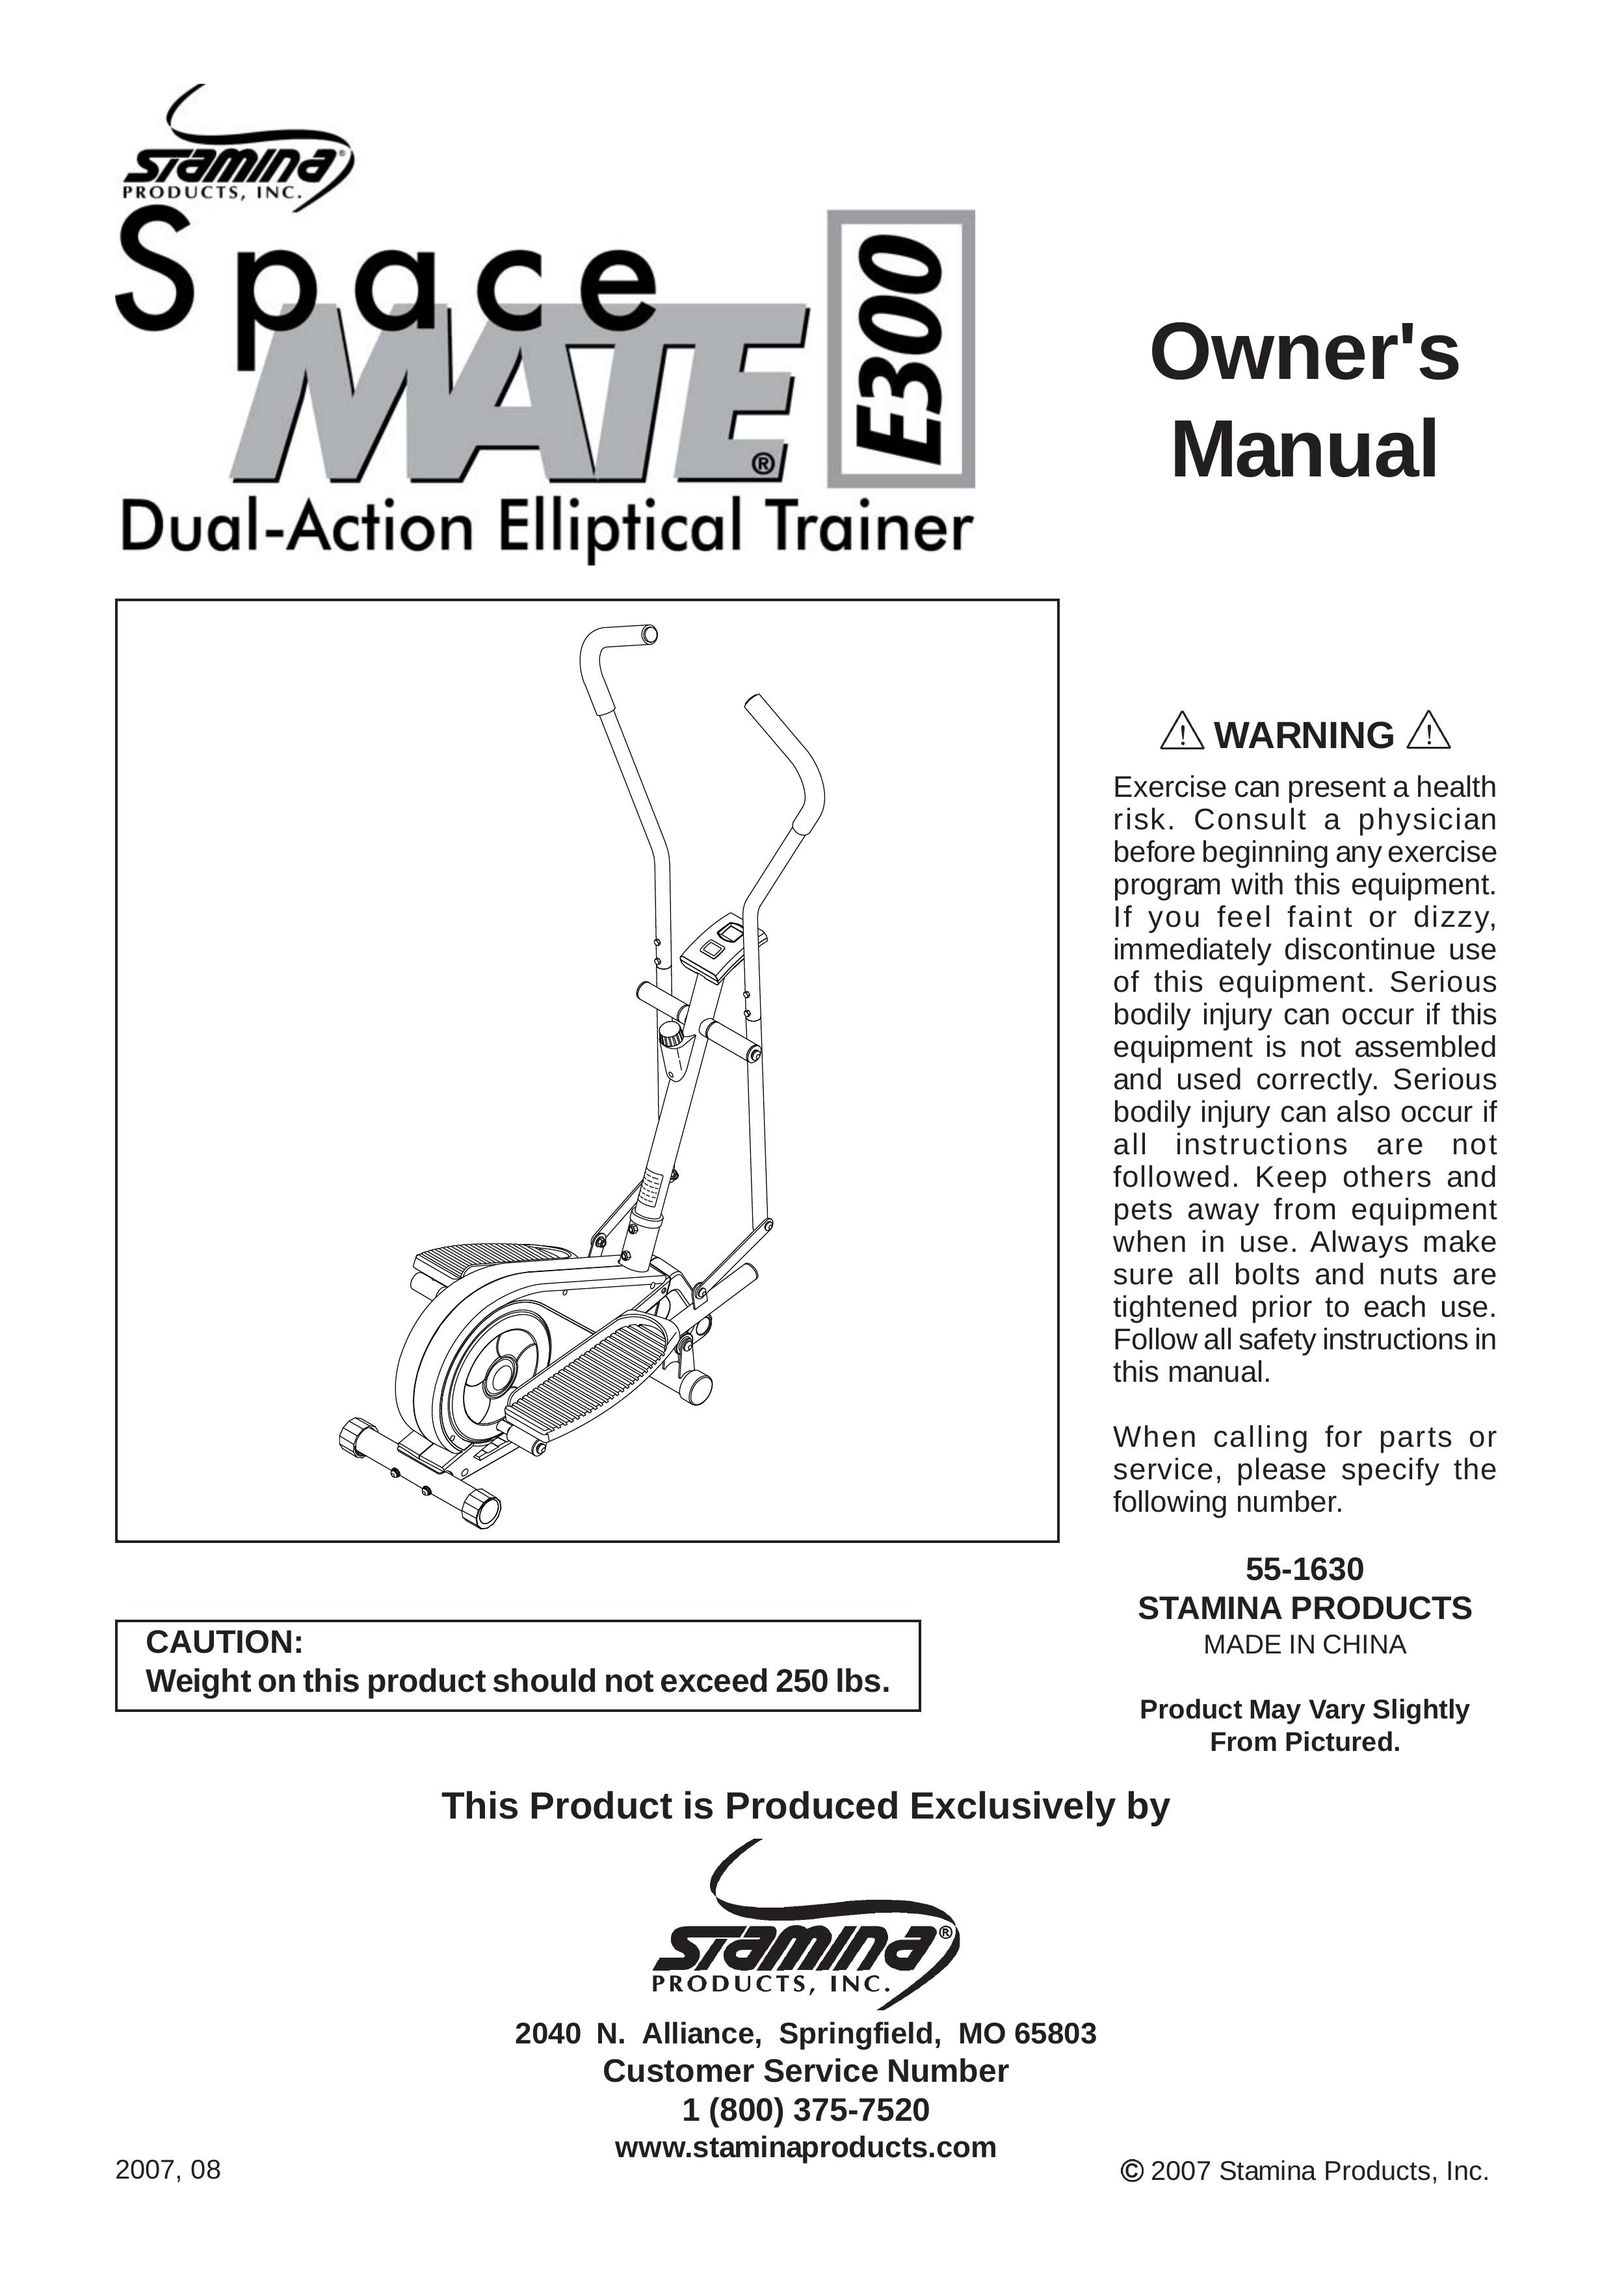 Stamina Products 55-1630 Elliptical Trainer User Manual